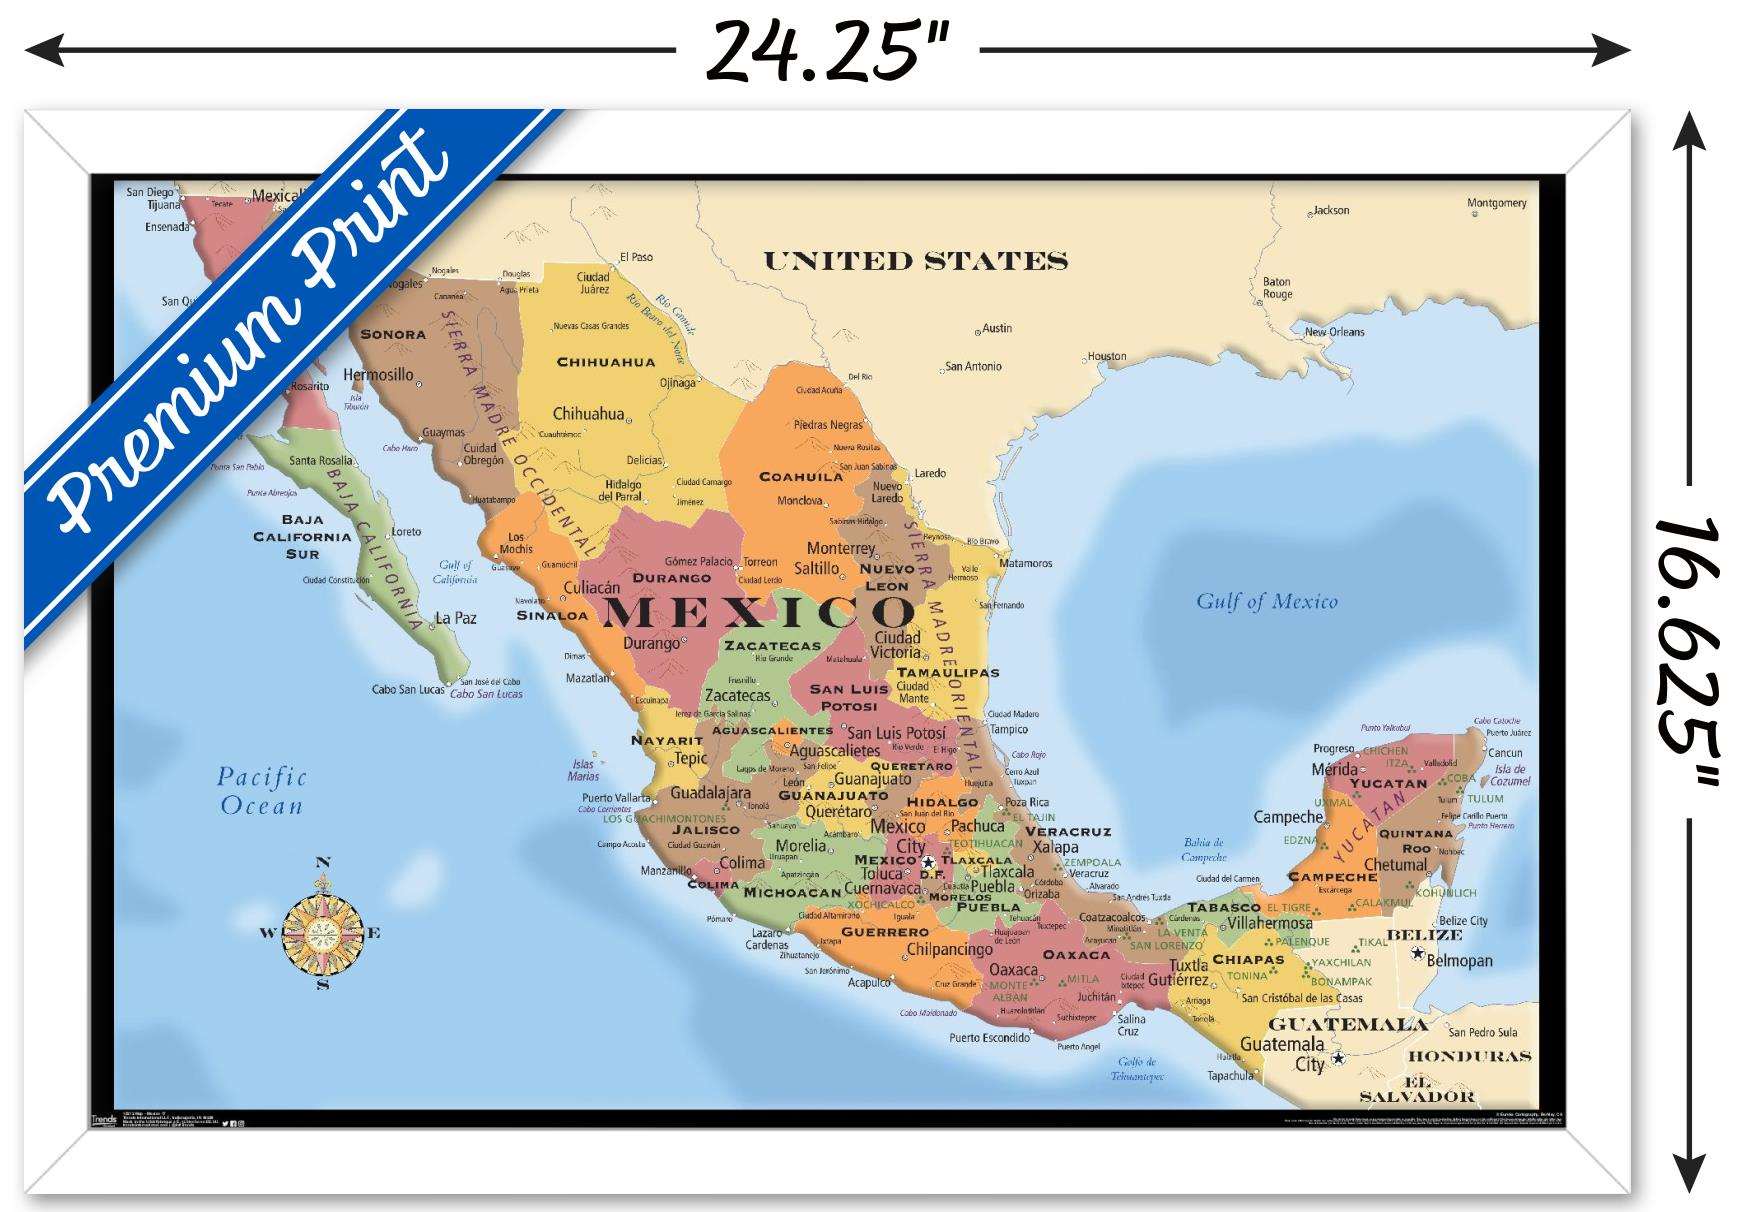 Map - Mexico Wall Poster, 14.725" x 22.375", Framed - image 3 of 5